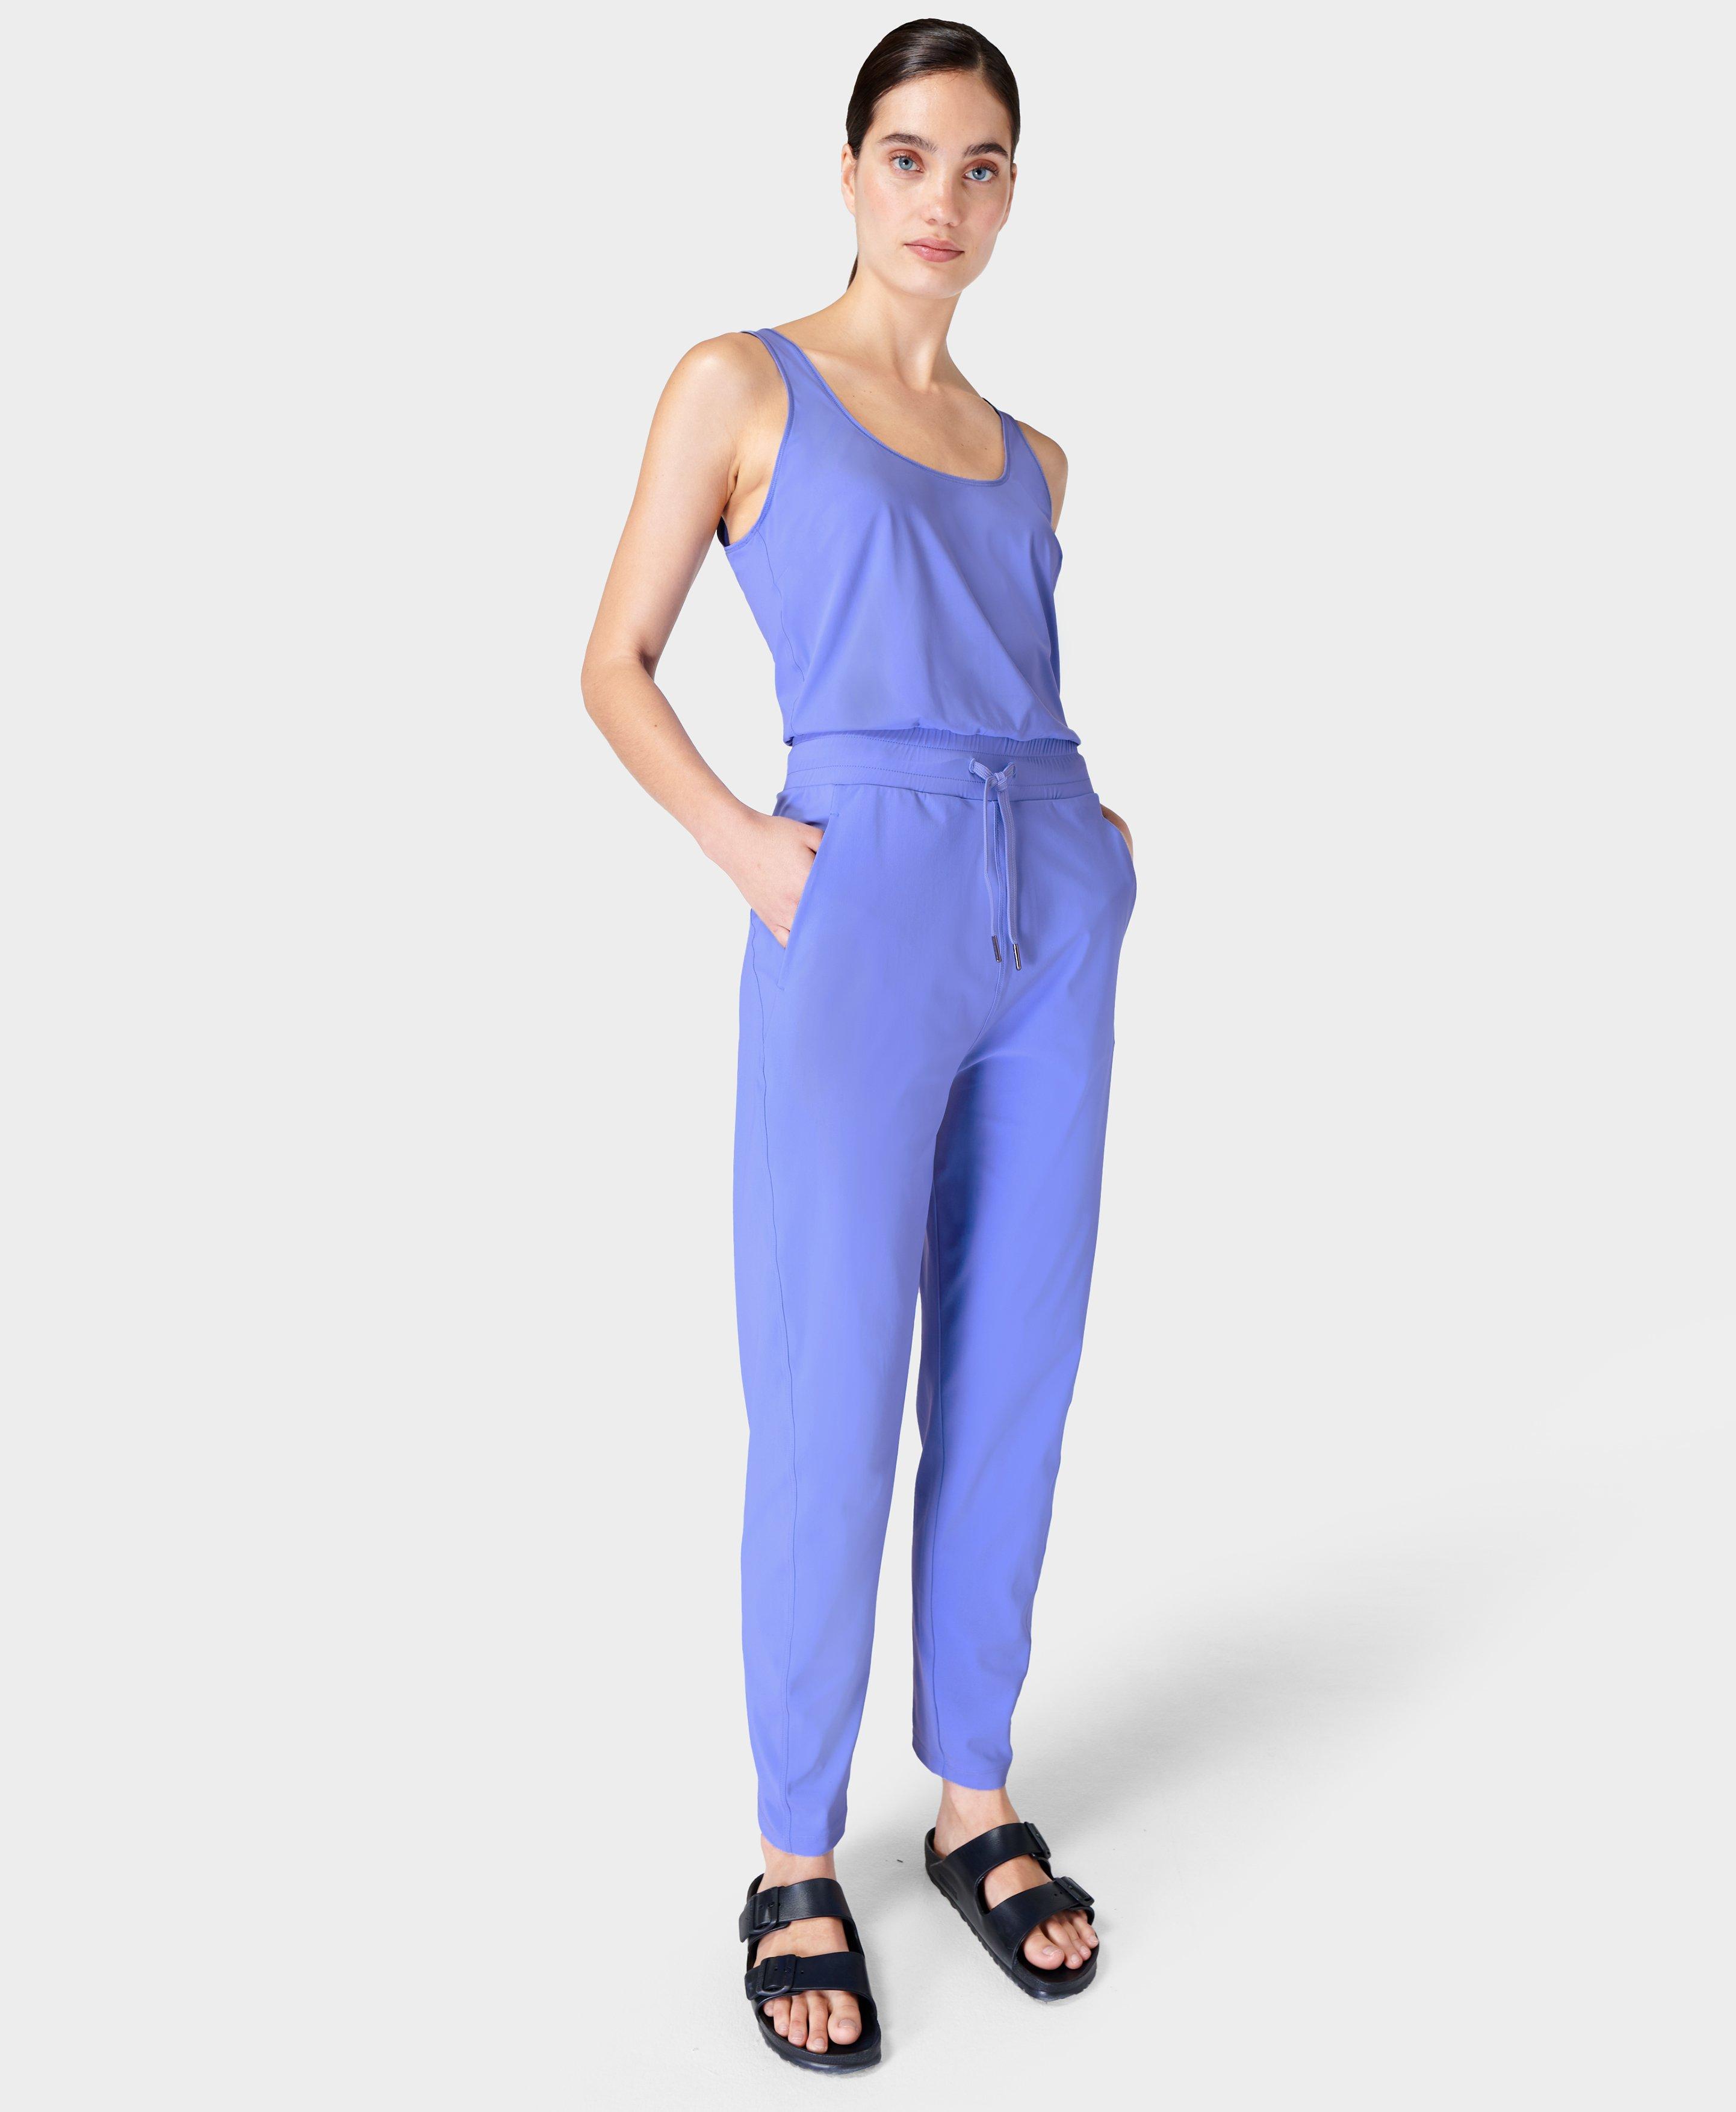 COS COS GATHERED STRAPPY ROMPER - LIGHT BLUE - Jumpsuits - COS 99.00